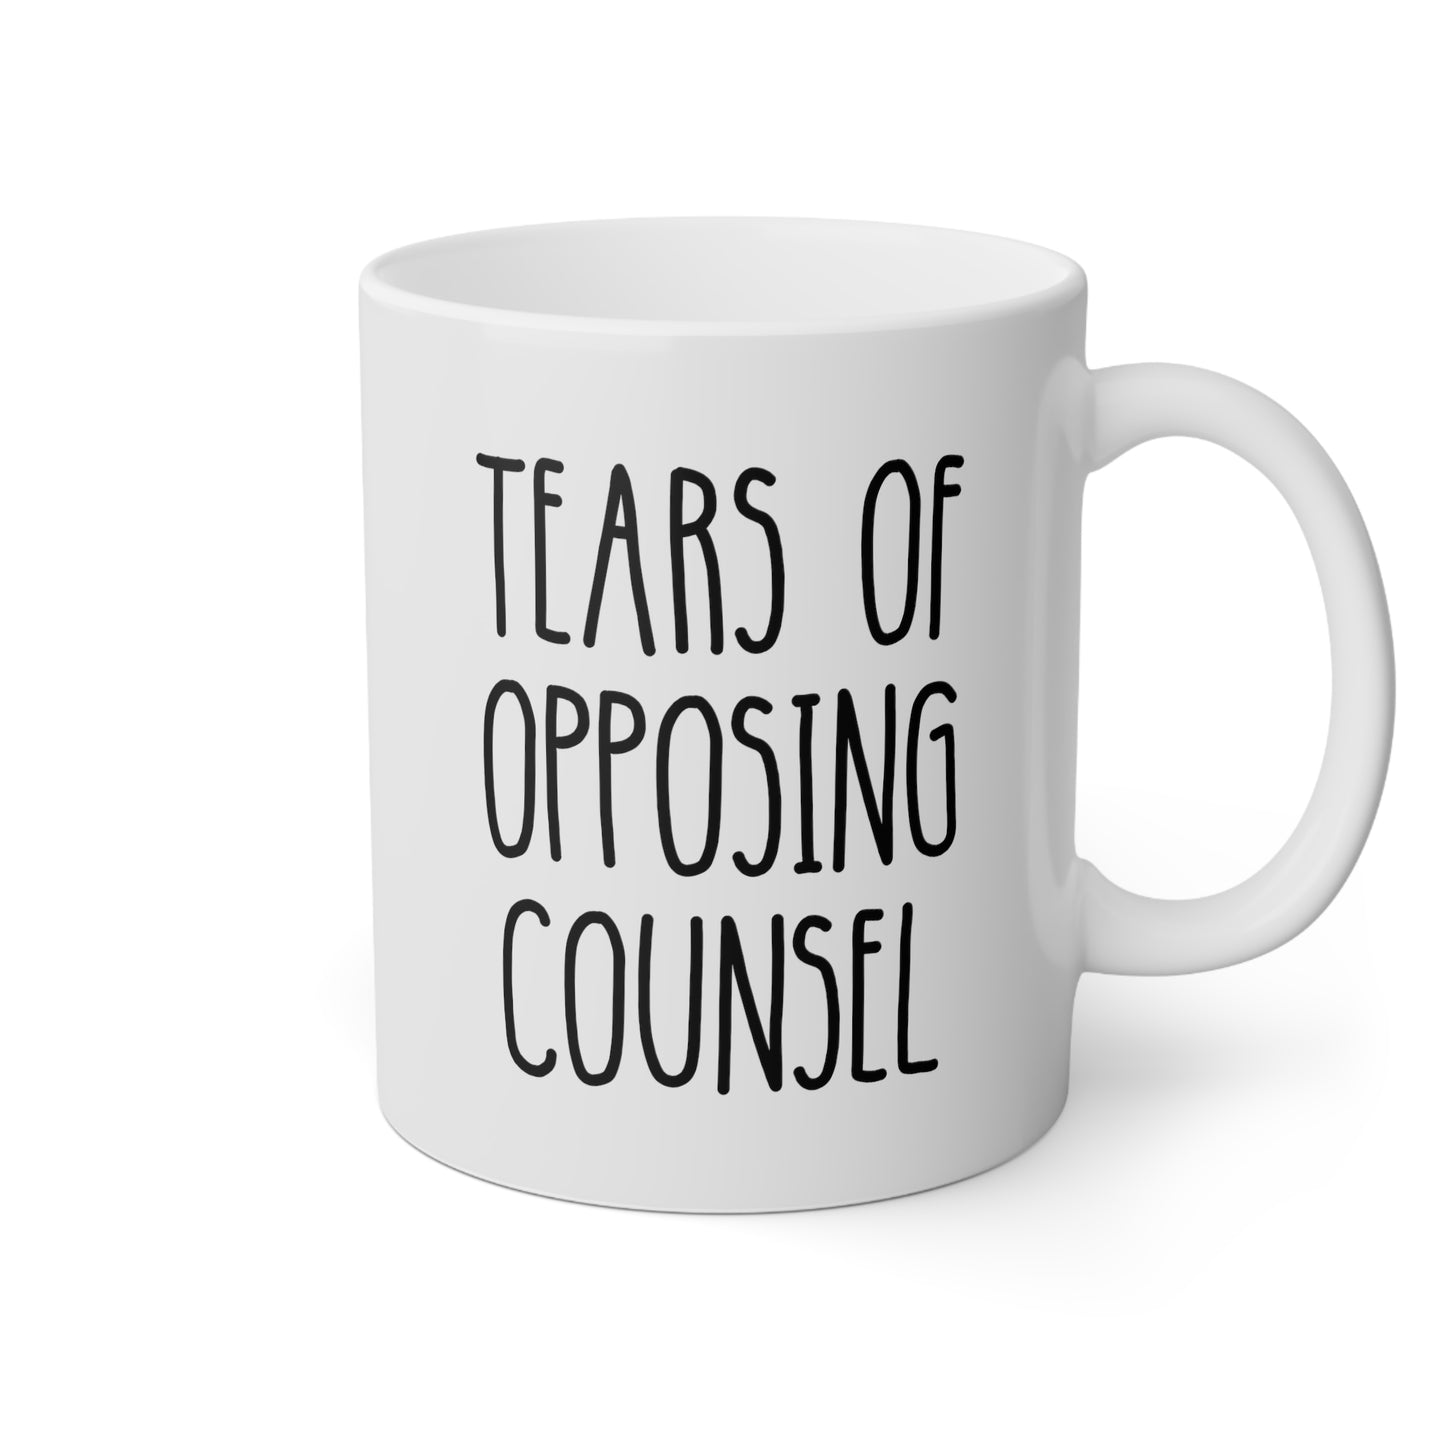 Tears Of Opposing Counsel 11oz white funny large coffee mug gift for lawyer law student graduation solicitor attorney prosecutor waveywares wavey wares wavywares wavy wares